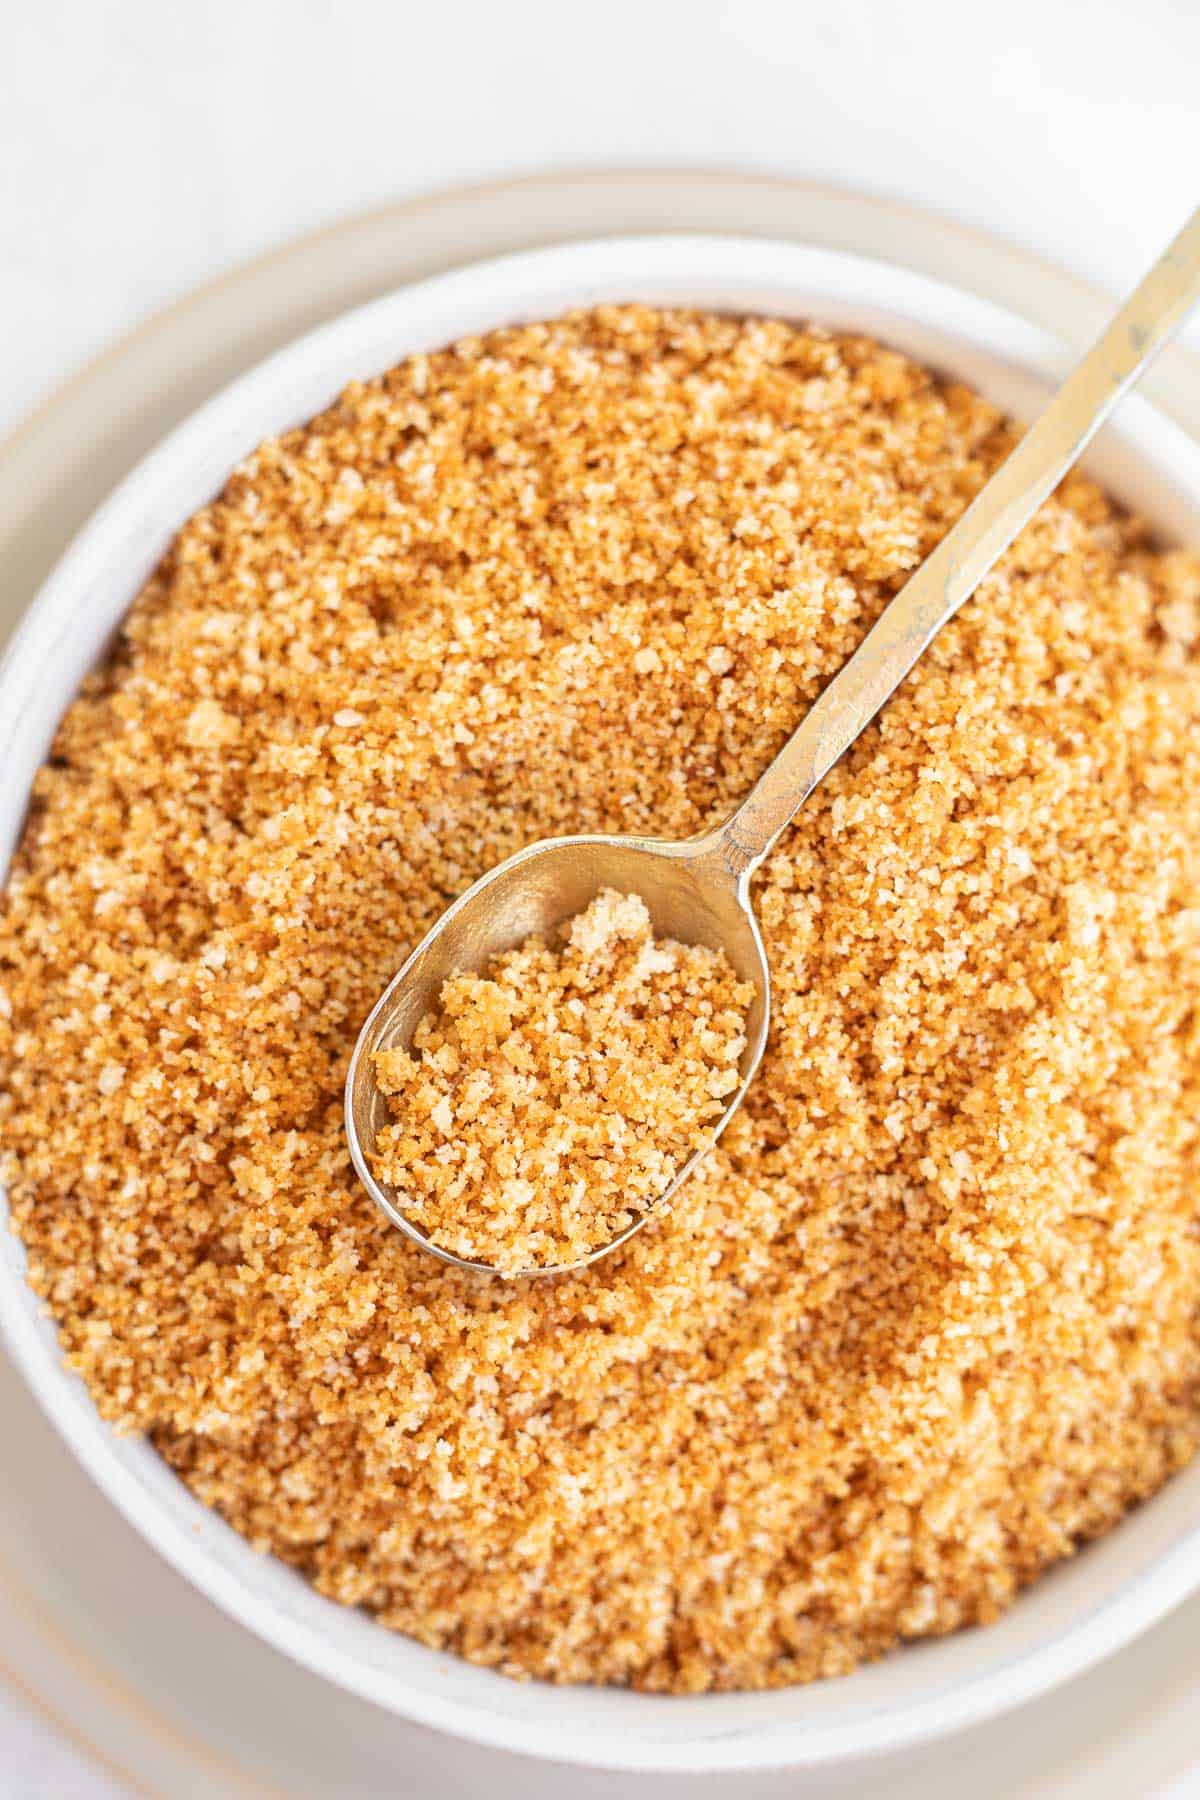 browned gluten free bread crumbs in a white bowl with a spoon.